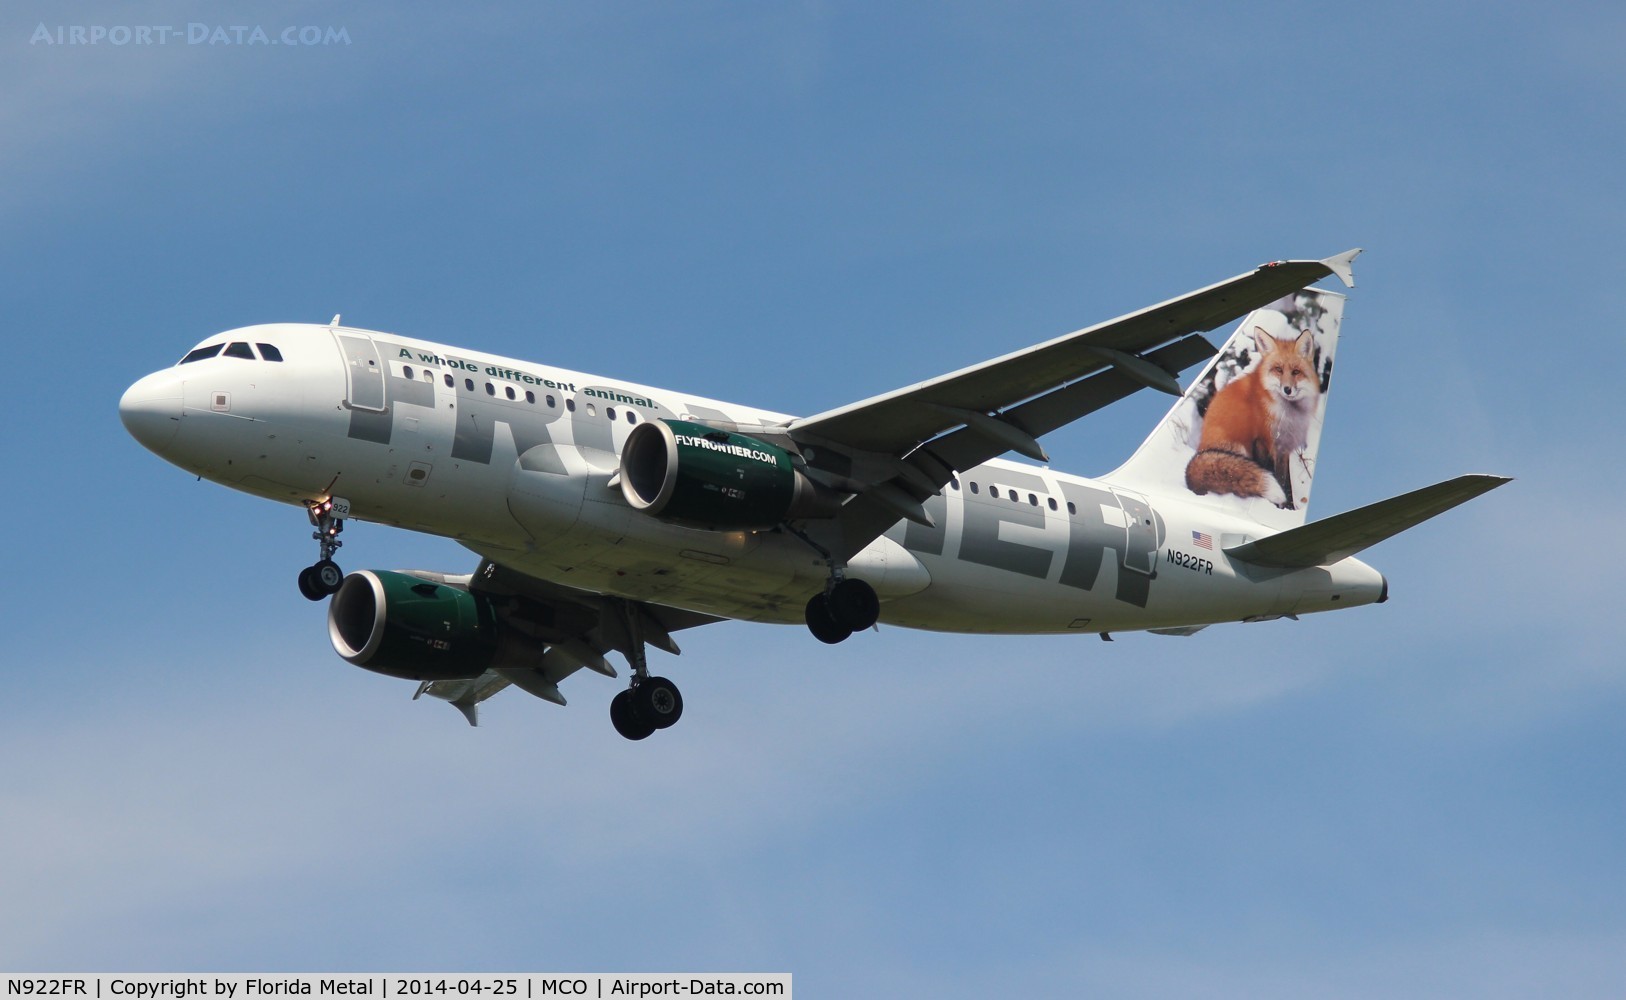 N922FR, 2003 Airbus A319-111 C/N 2012, Foxy the Red Fox Frontier Airlines